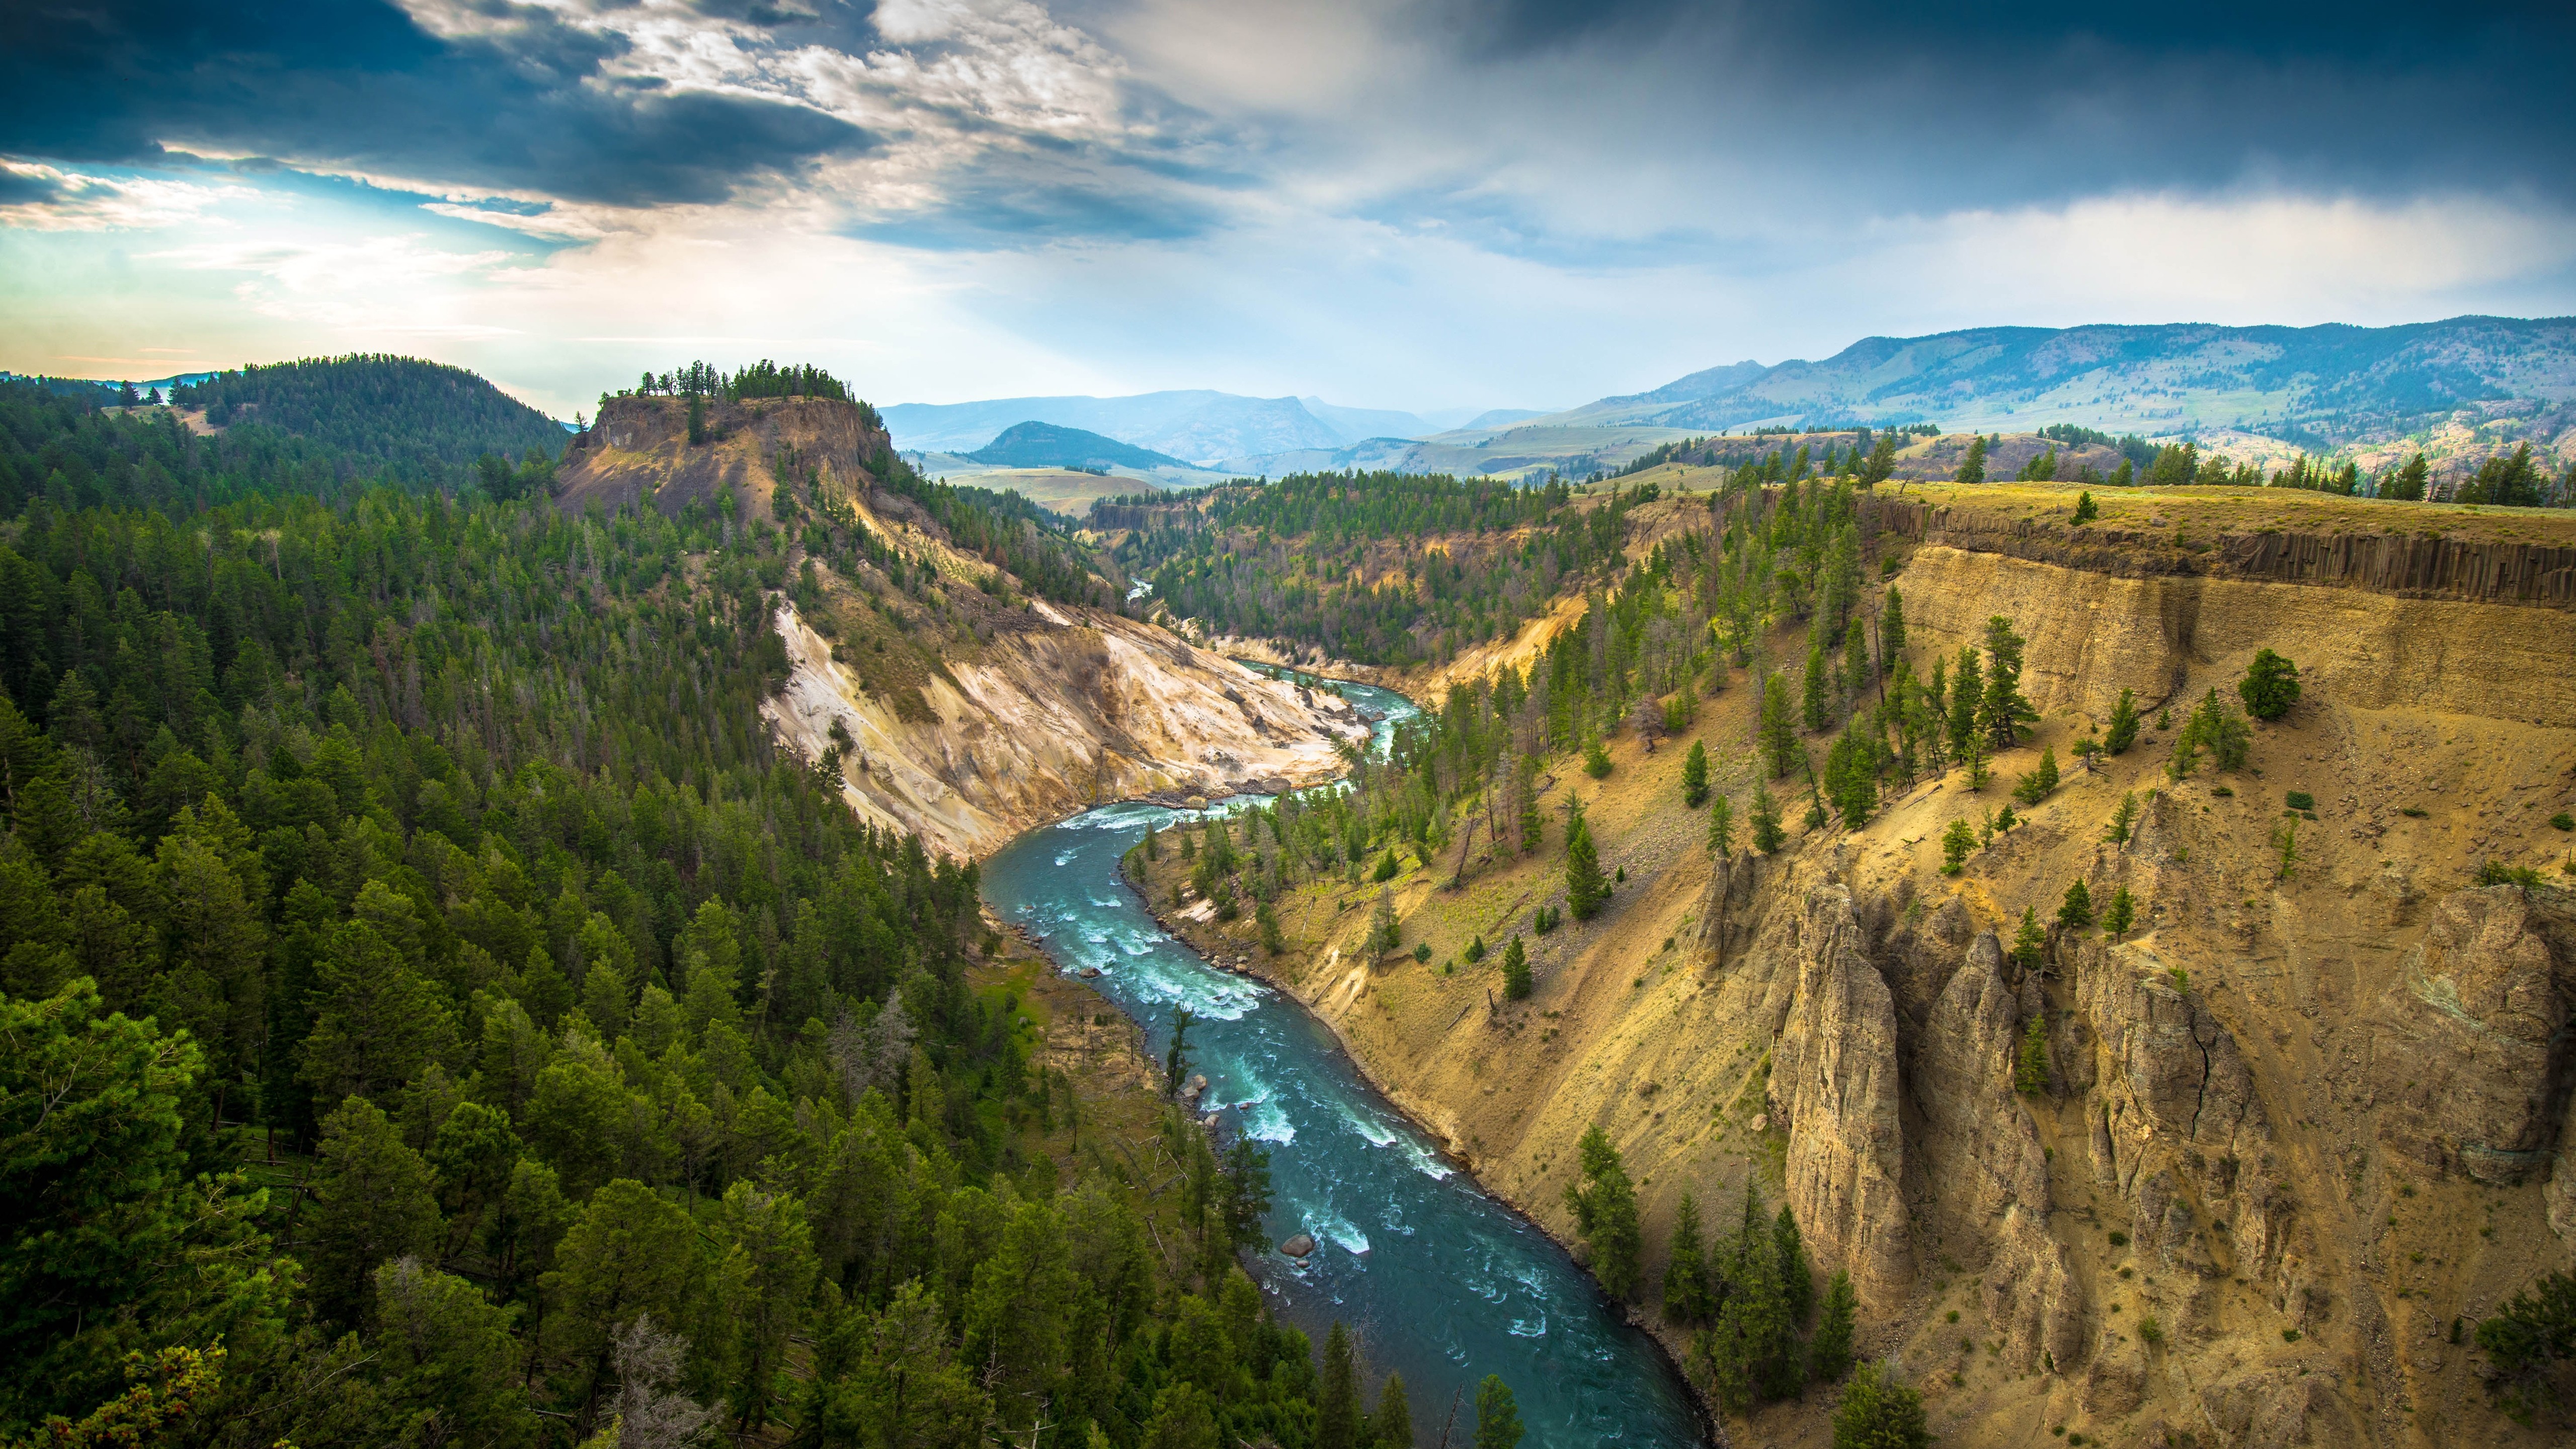 General 5120x2880 landscape Yellowstone National Park river nature USA rocks rock formation canyon Wyoming